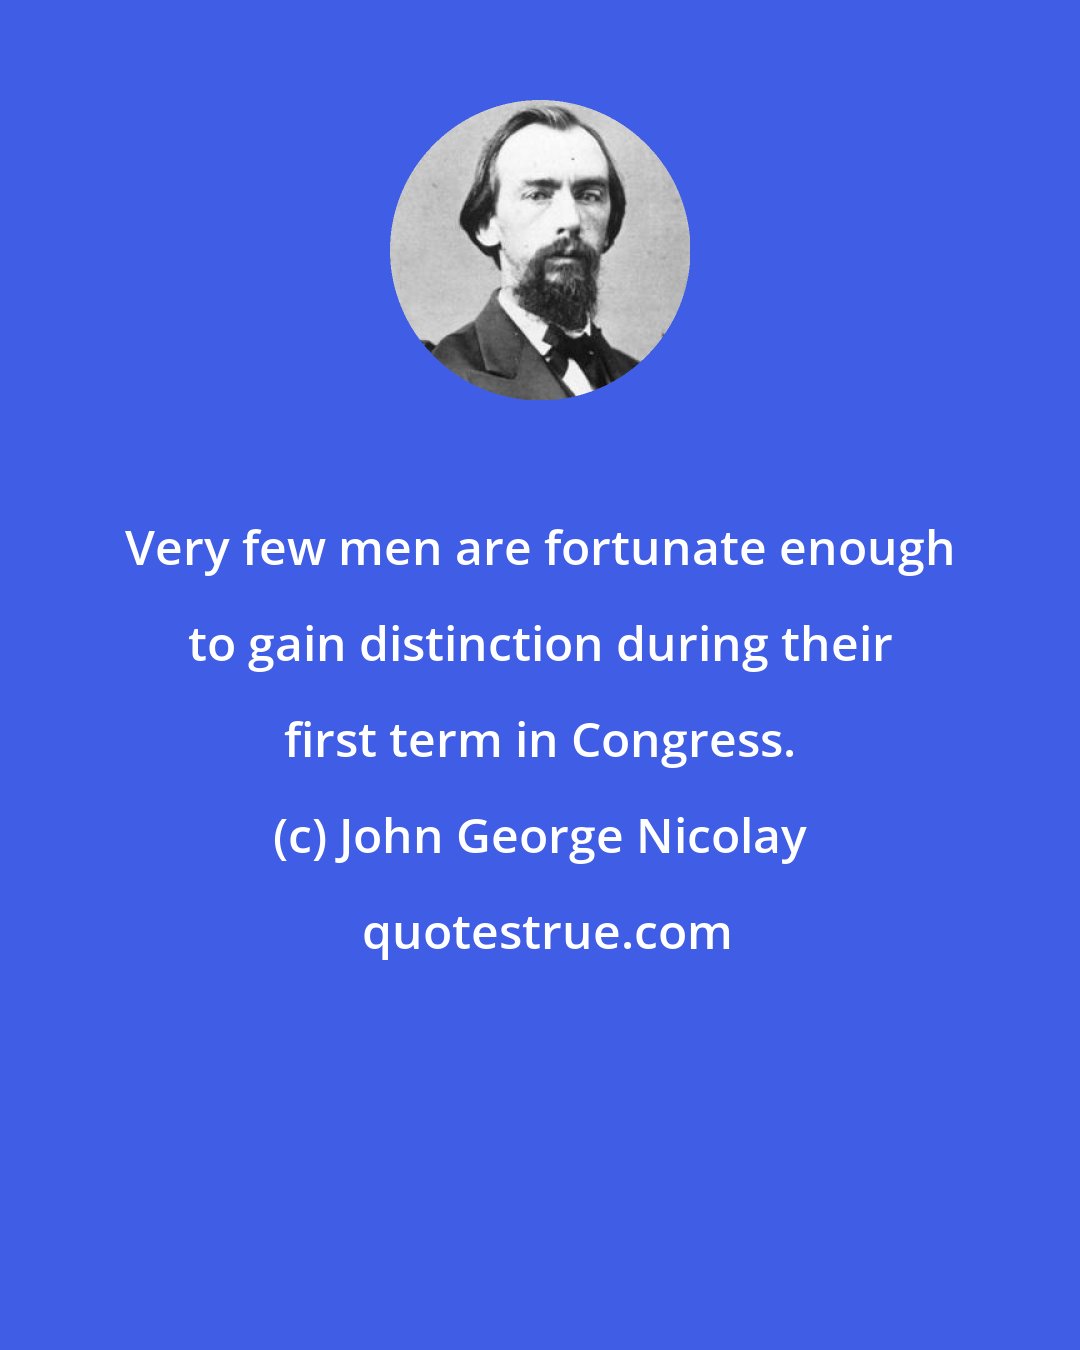 John George Nicolay: Very few men are fortunate enough to gain distinction during their first term in Congress.